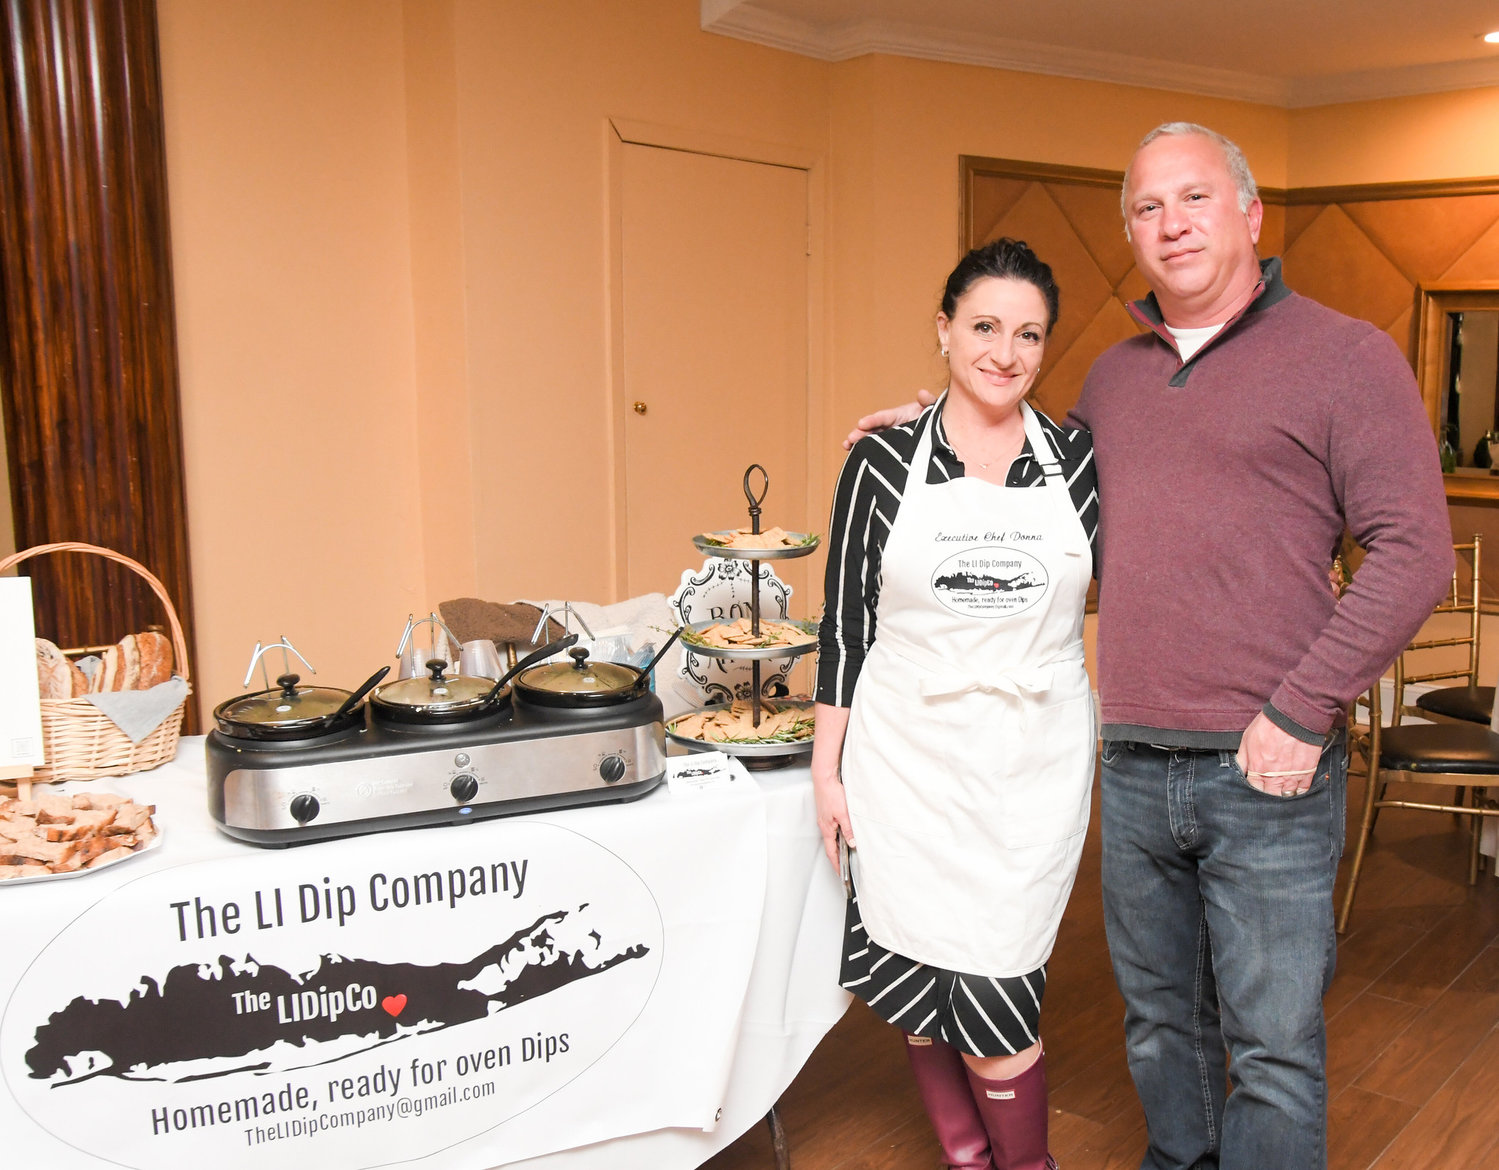 Husband-and-wife team Michael and Donna Garone work together to provide Long Island with unique and fulfilling dips.